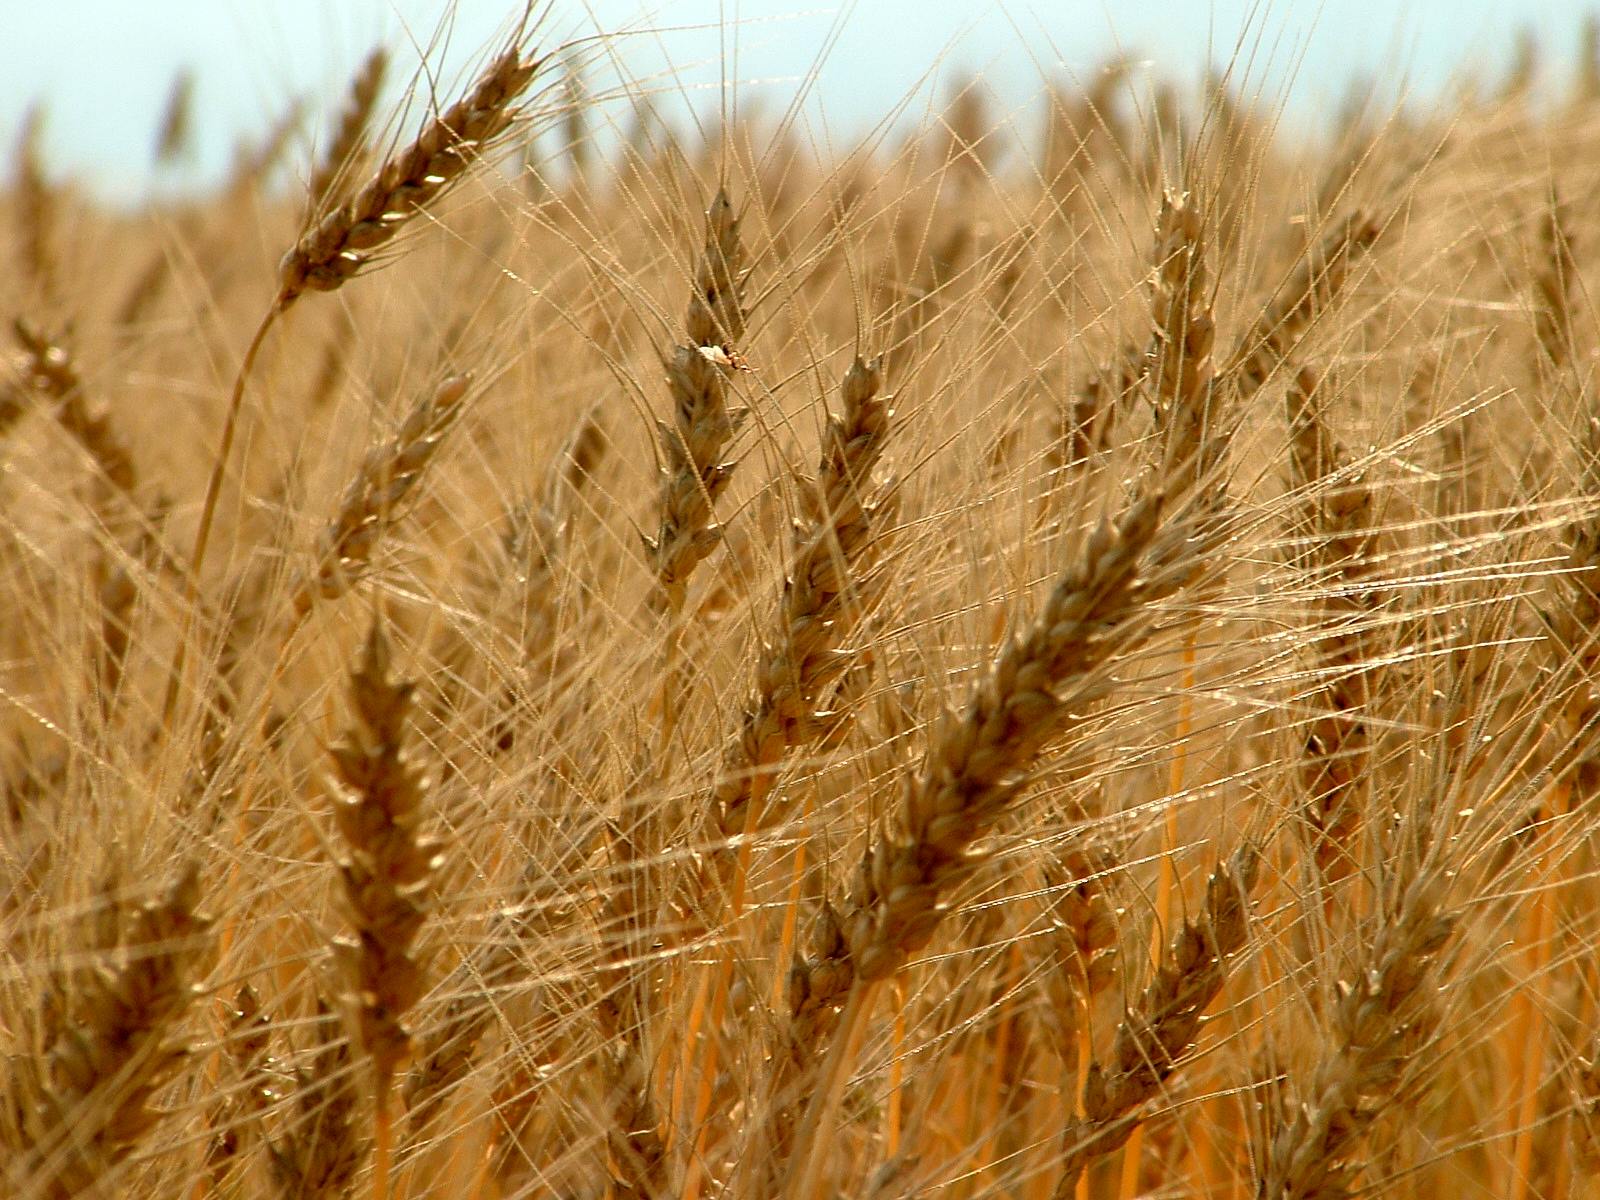 the grain in the field is ready to be harvested